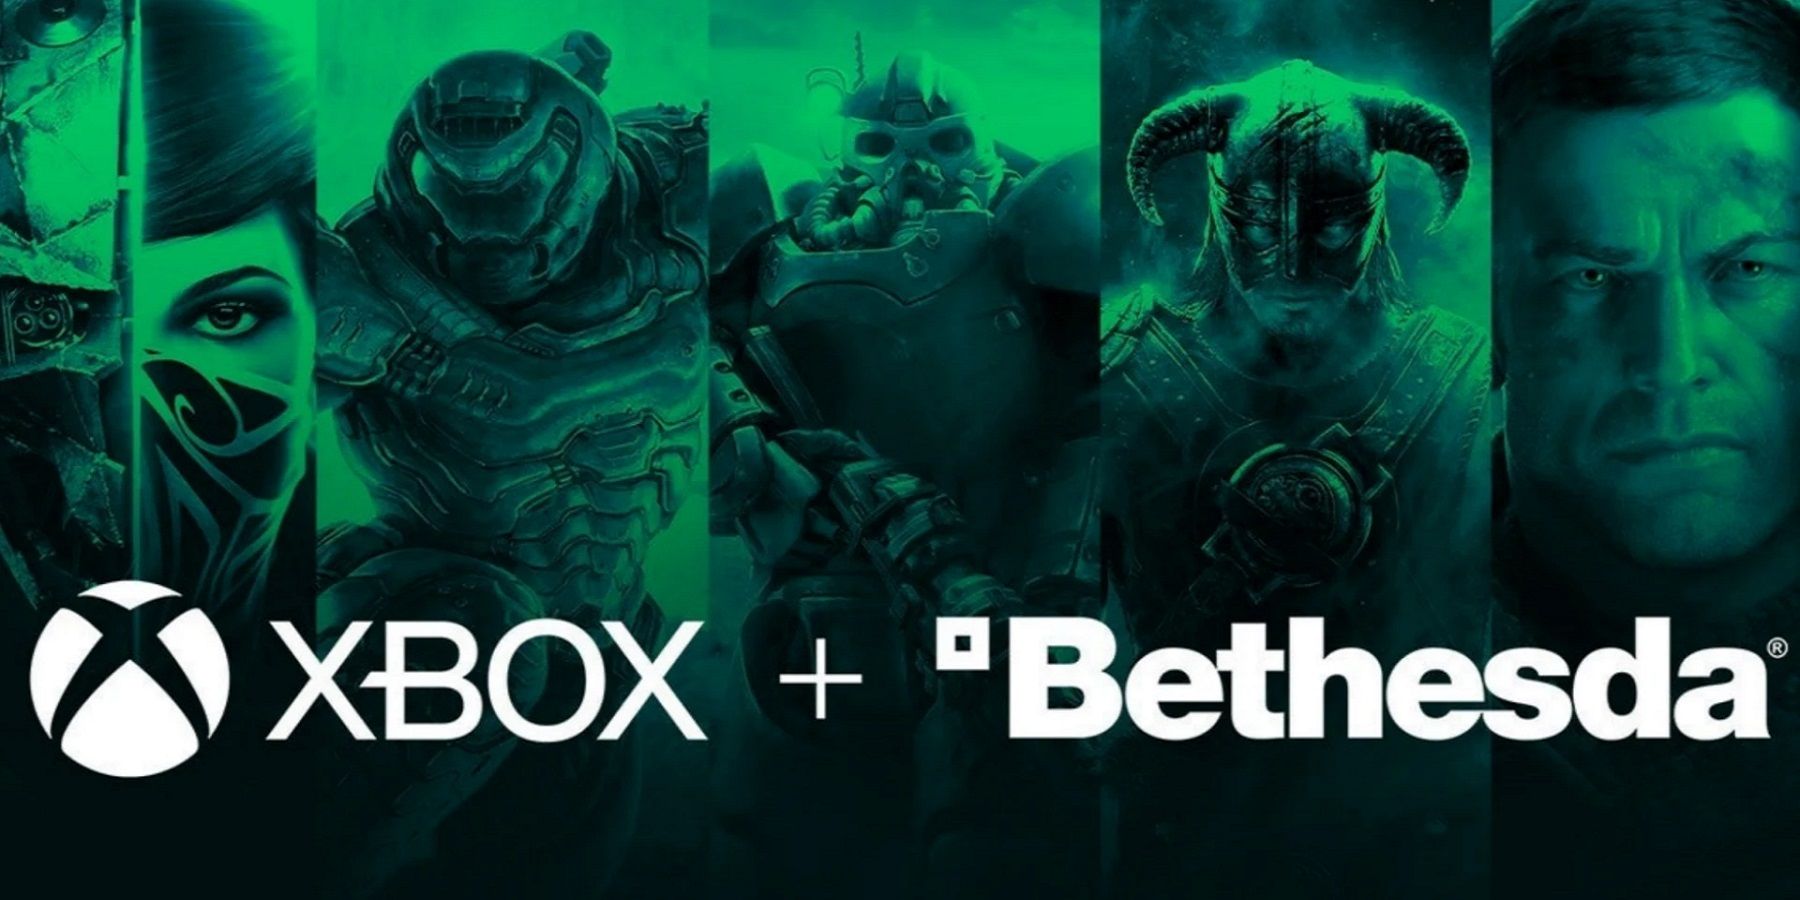 A green image showing the Xbox and Bethesda logos with some artwork from games like Doom, Skyrim, and Fallout.